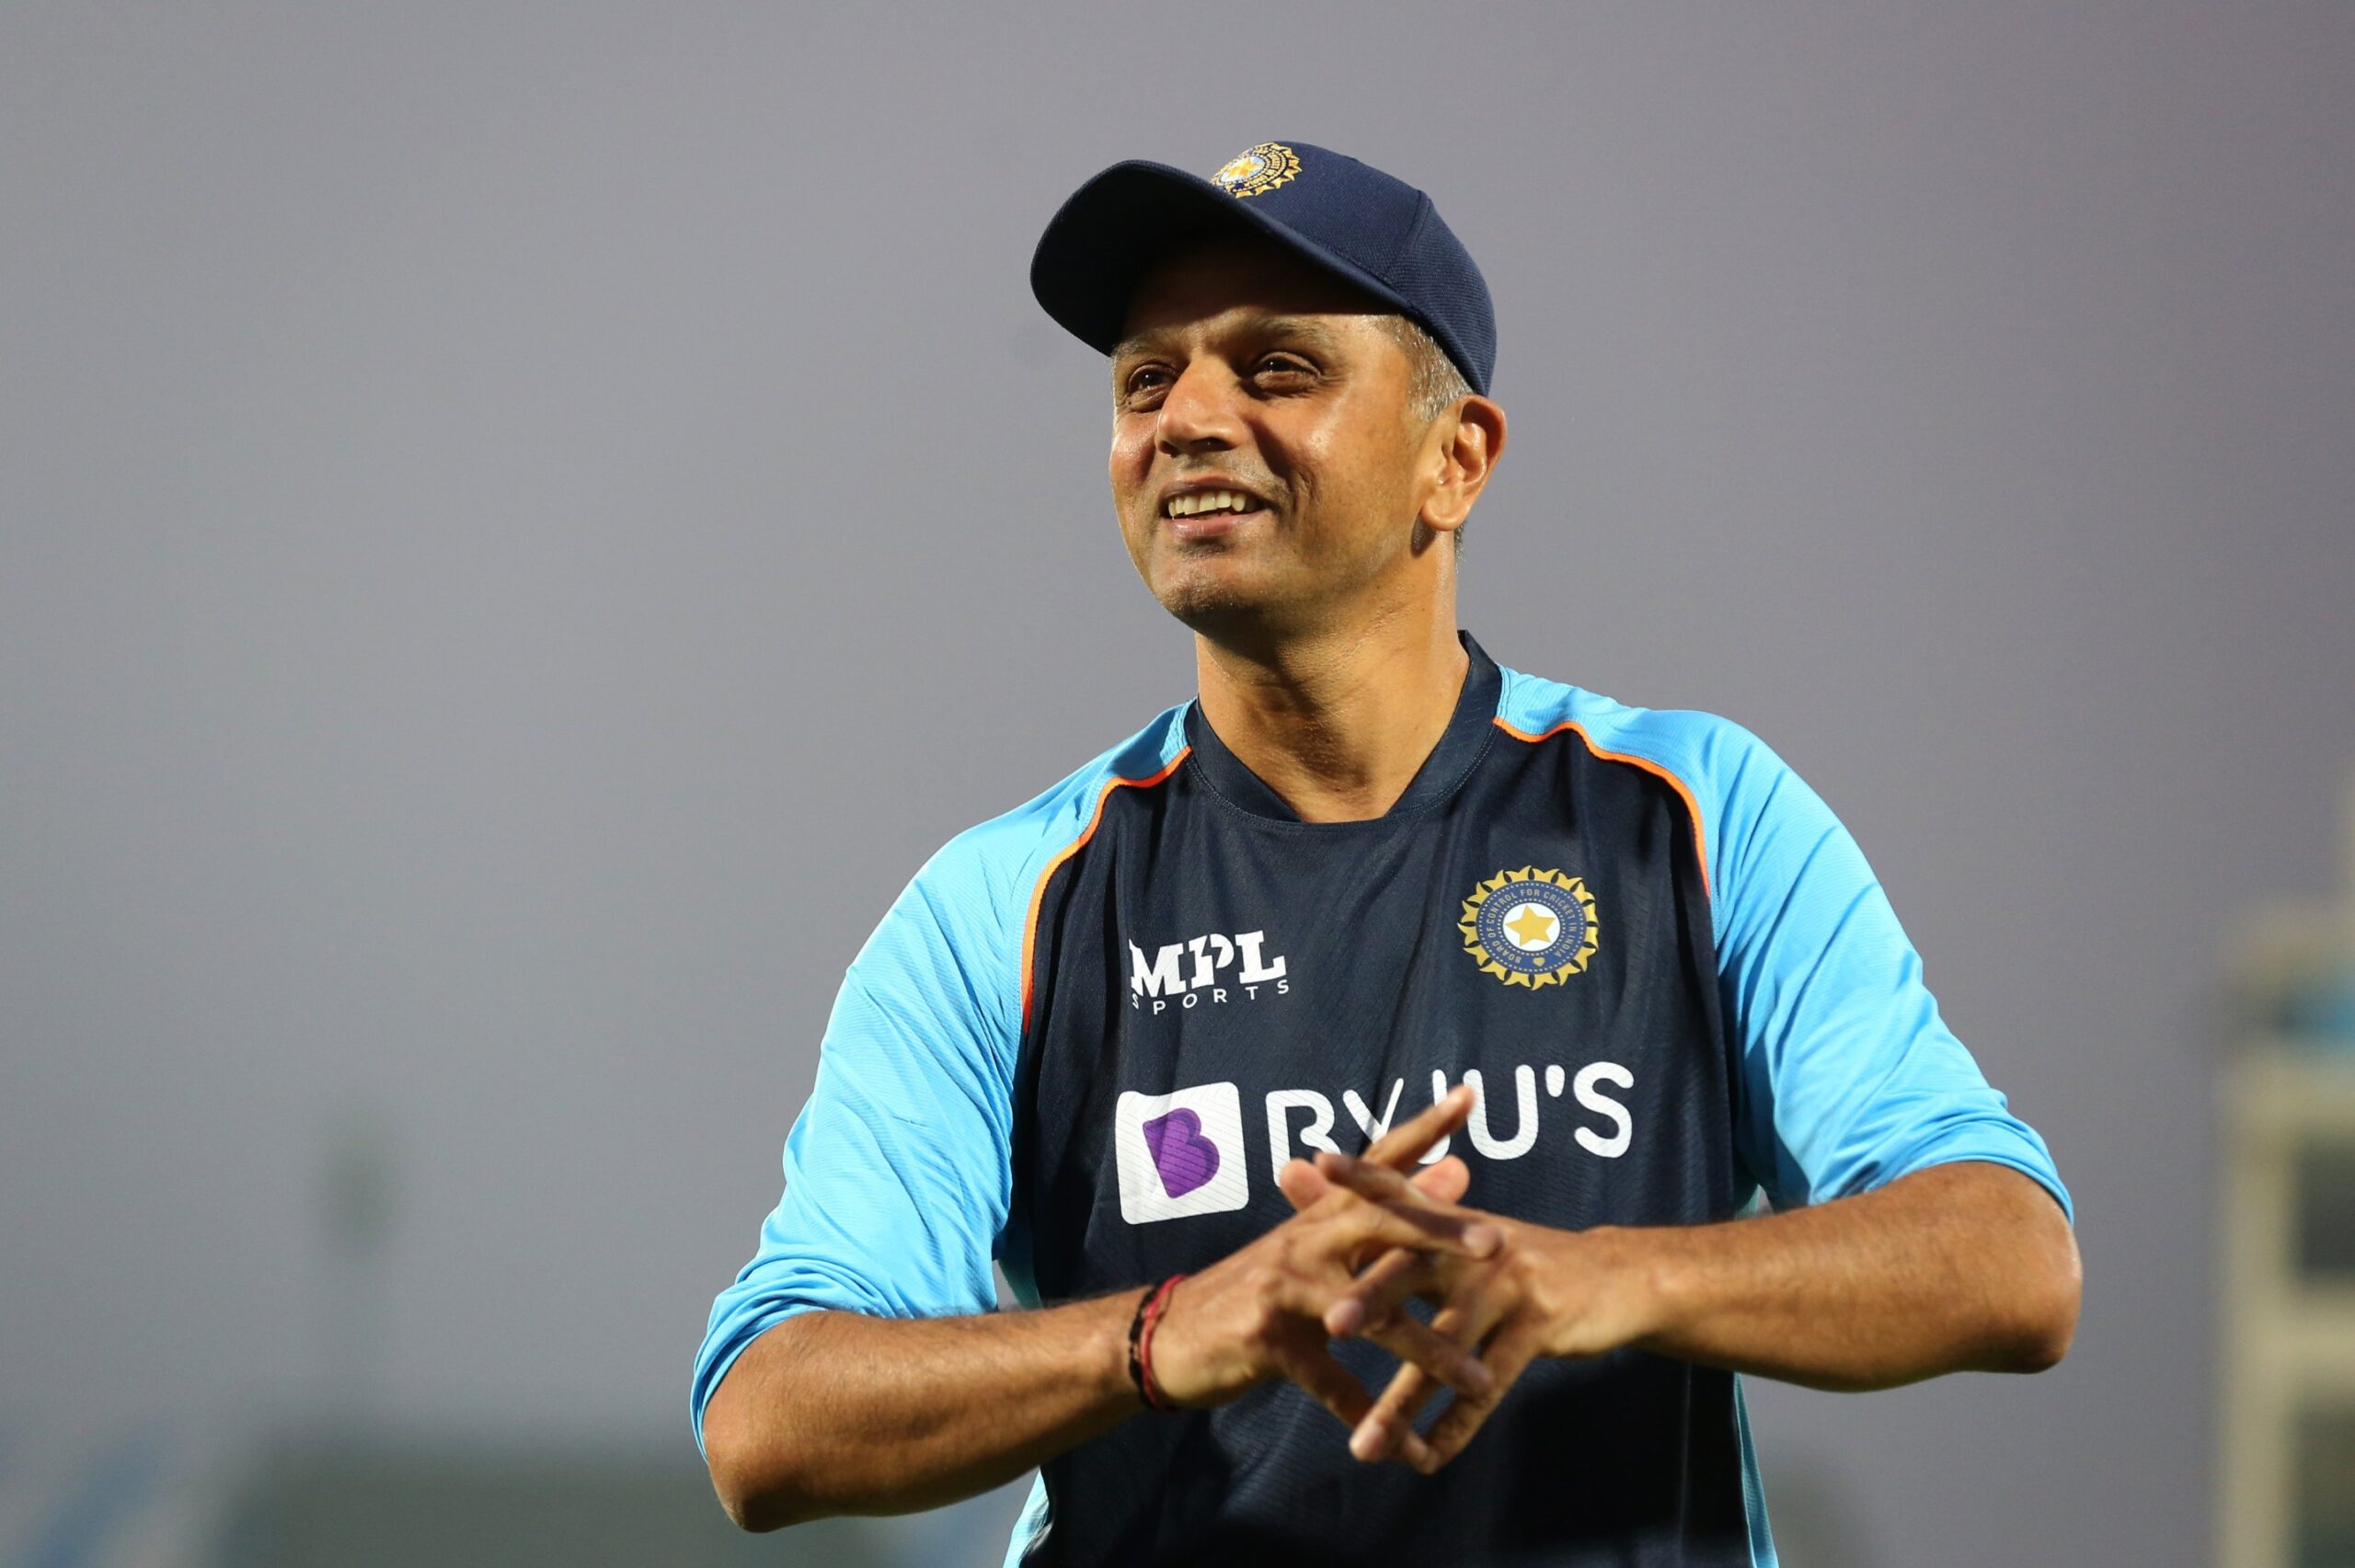  Dravid says he was not hurt by Saha’s comments after the Test snub